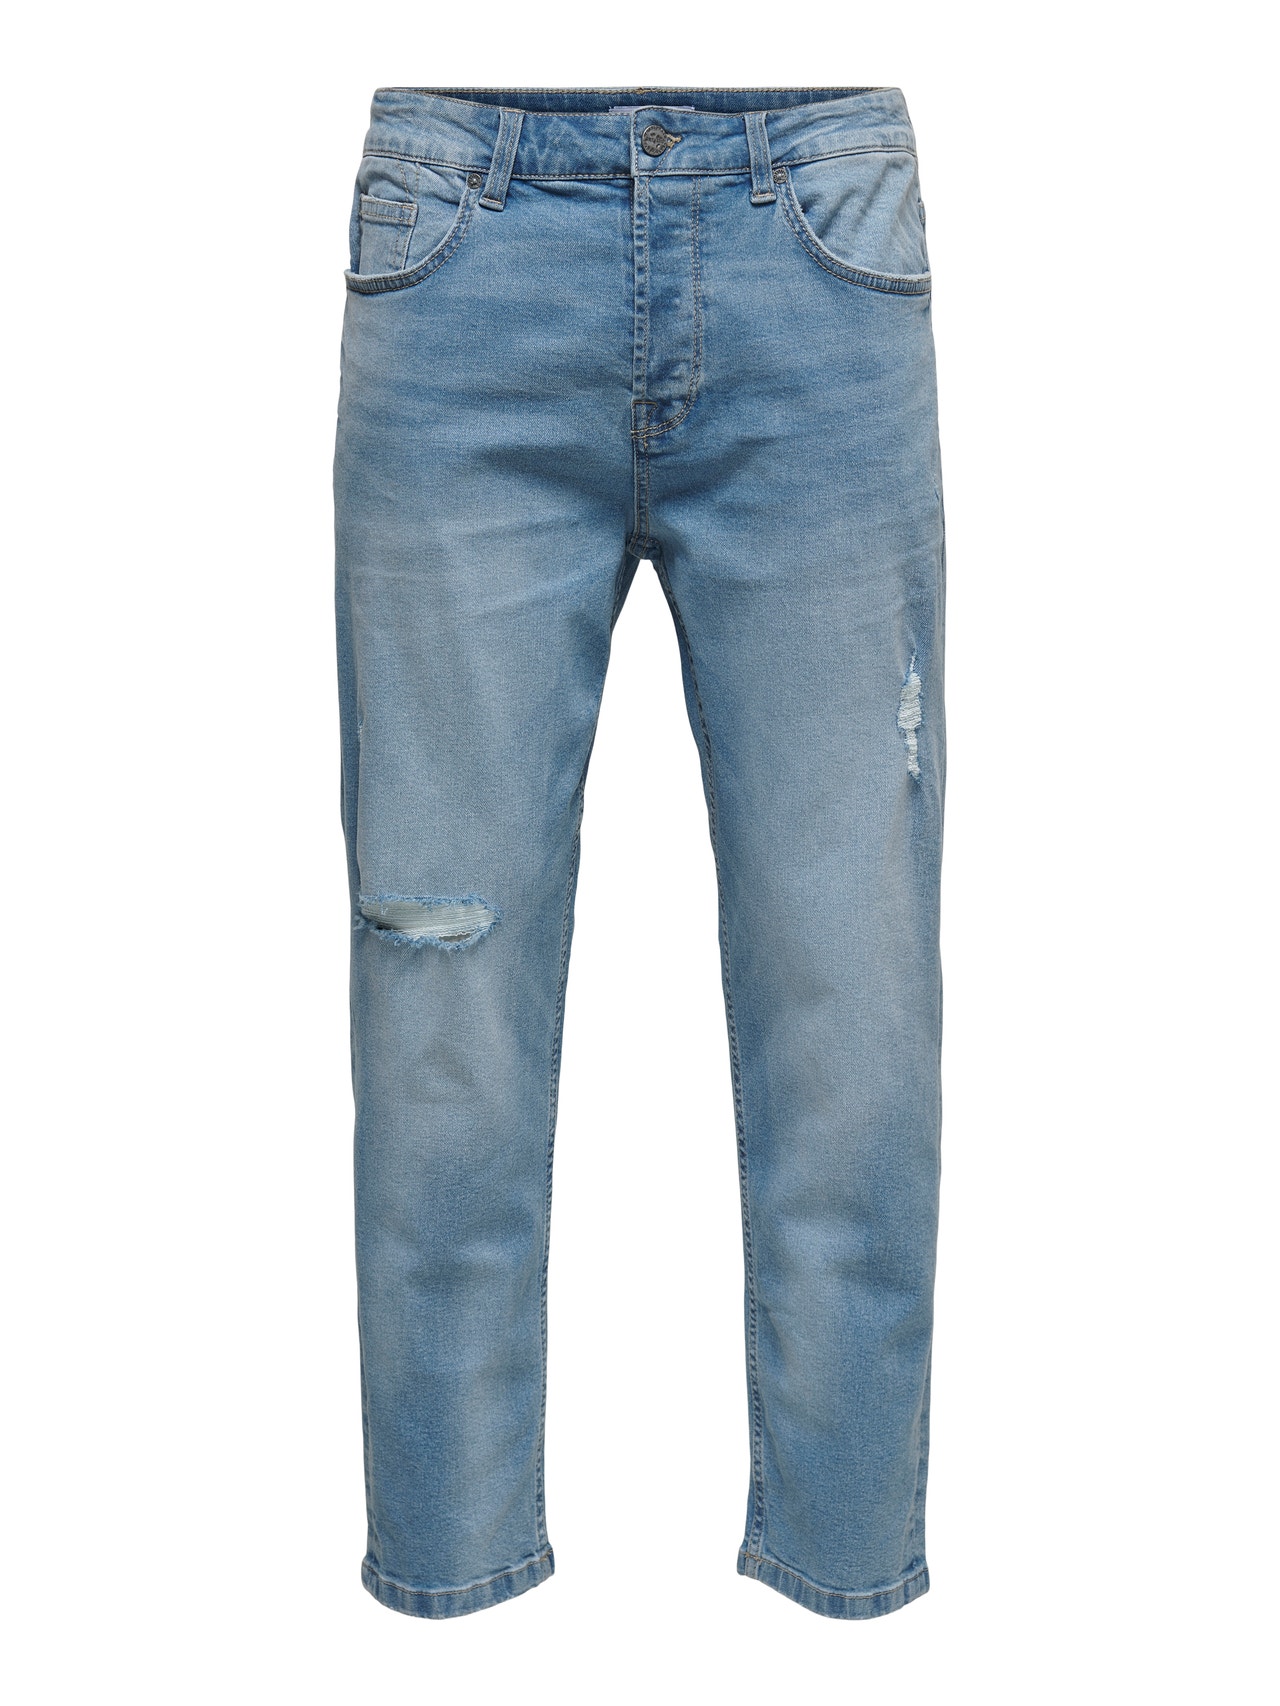 ONLY & SONS Jeans Tapered Fit Taille moyenne Ourlé destroy -Blue Denim - 22020773